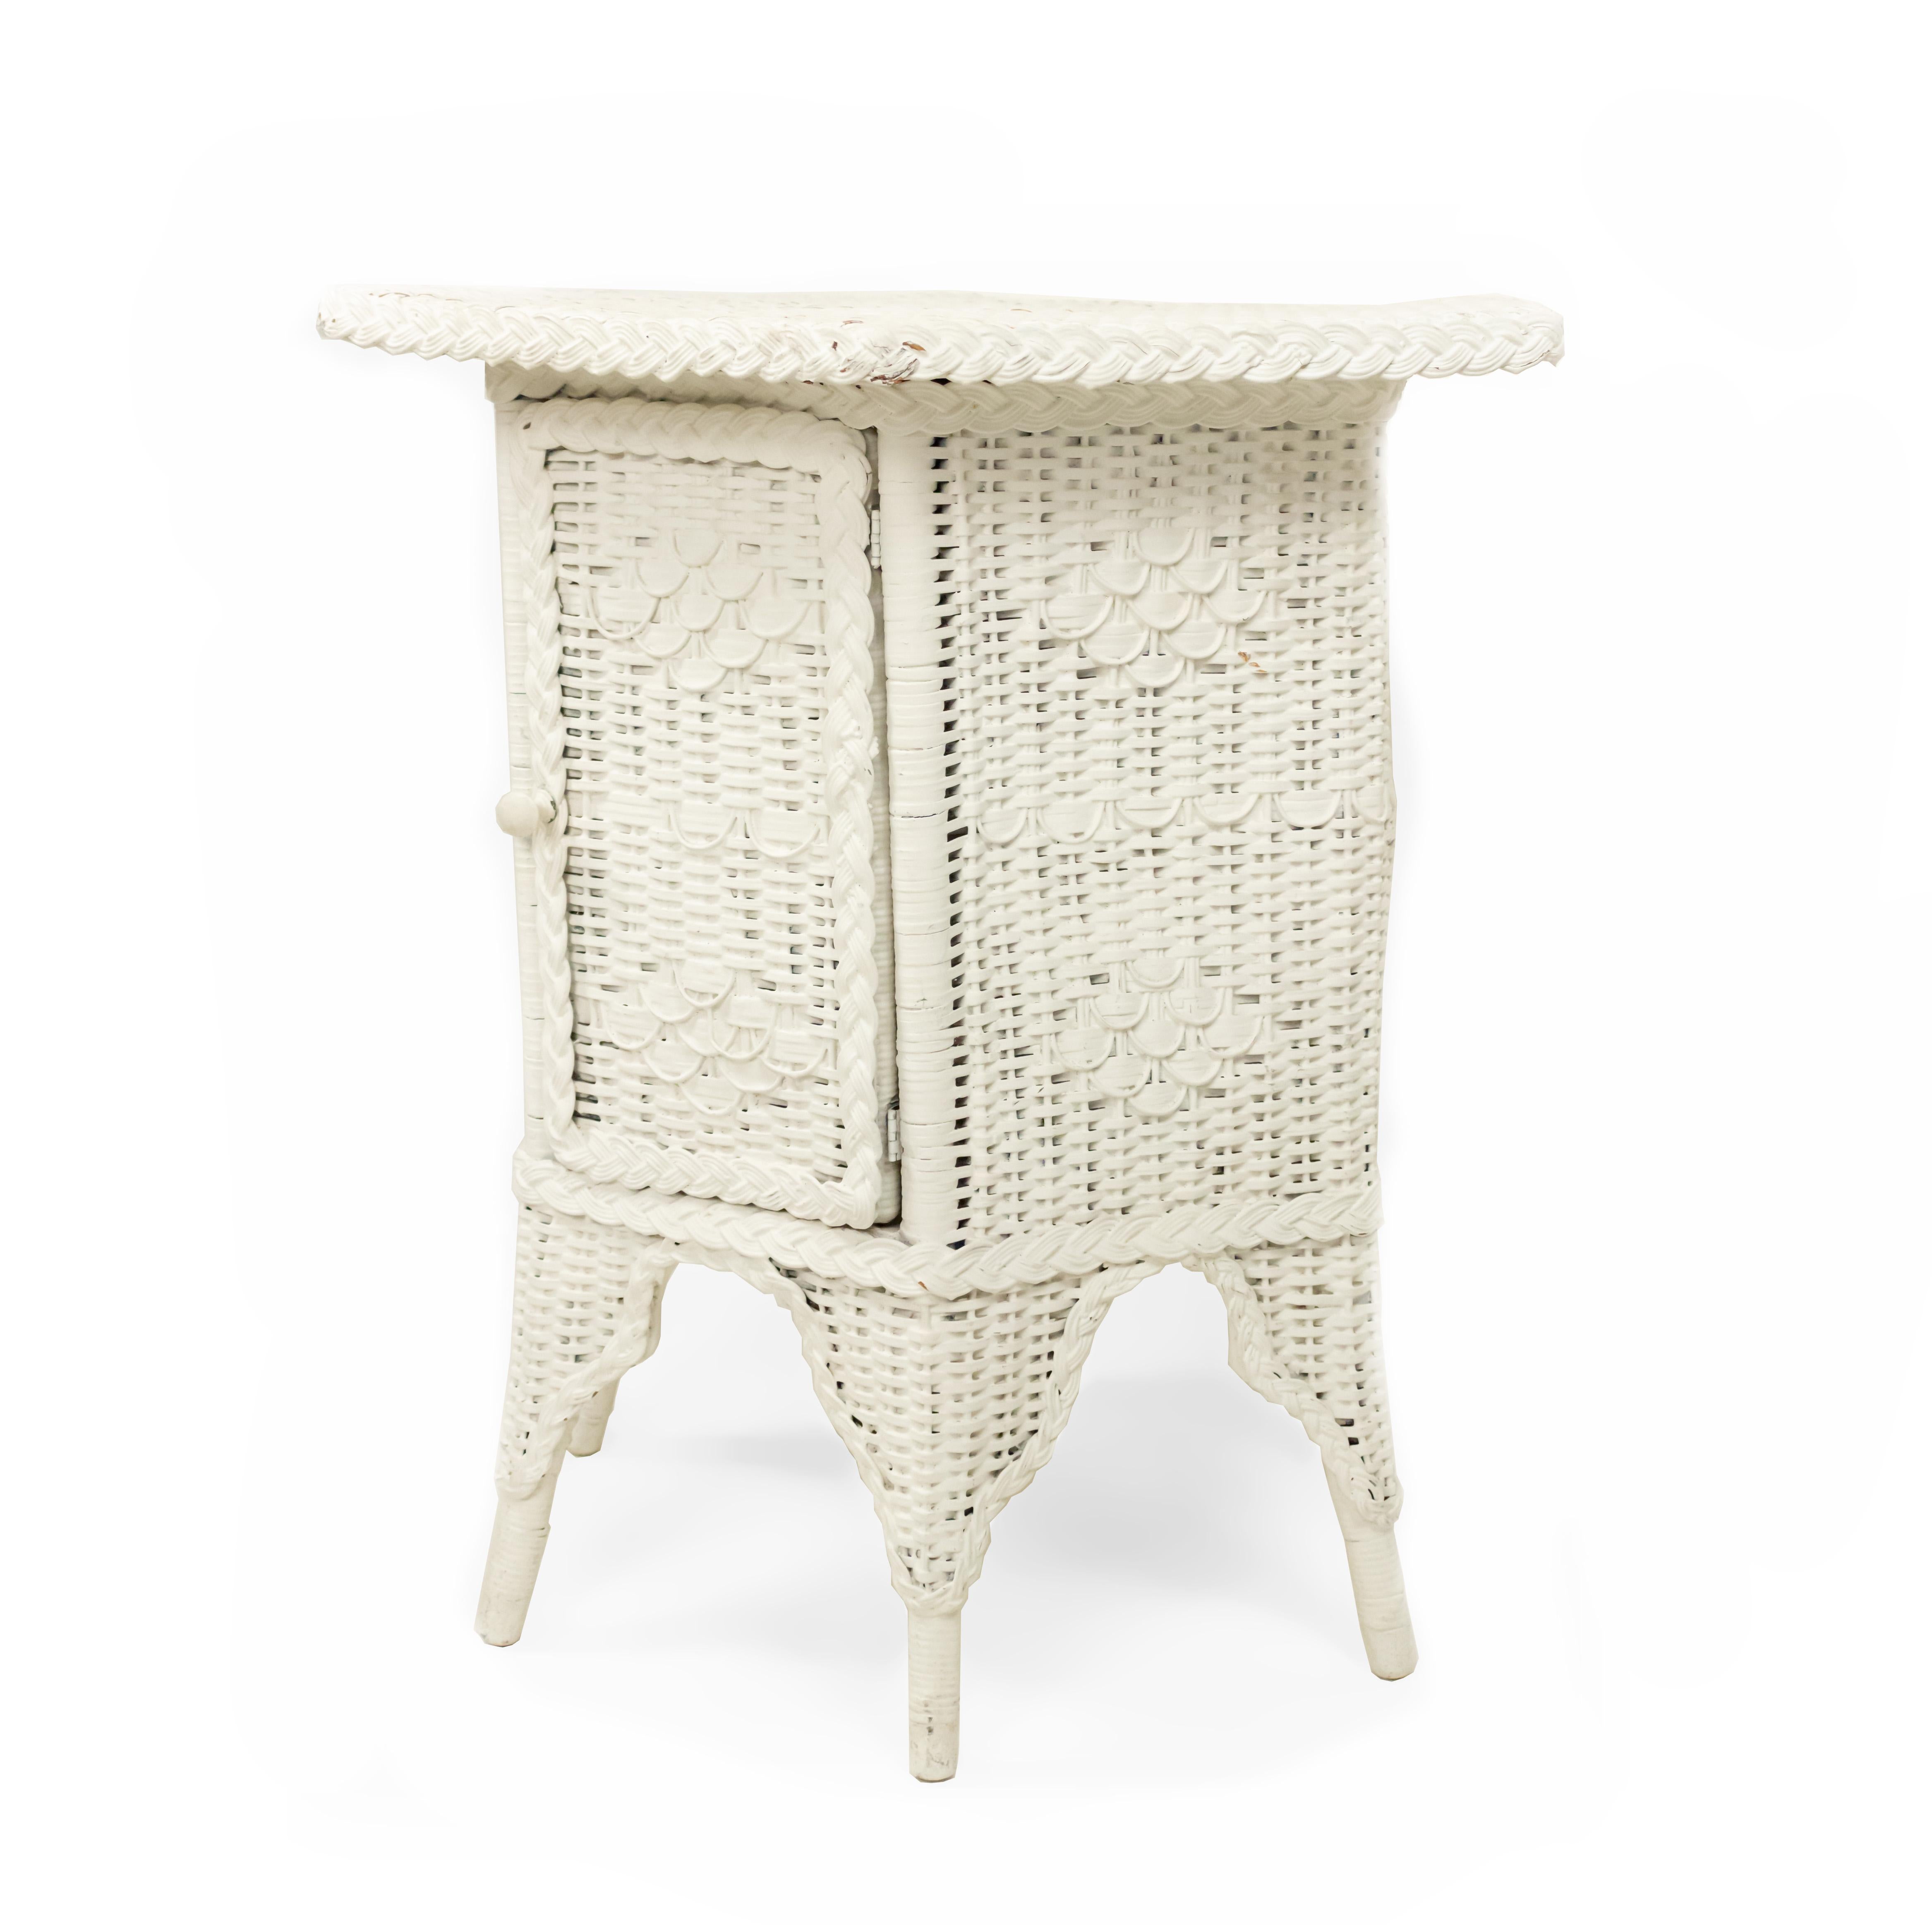 American Victorian white painted woven wicker large end table with 6-sided top and having a door on base.